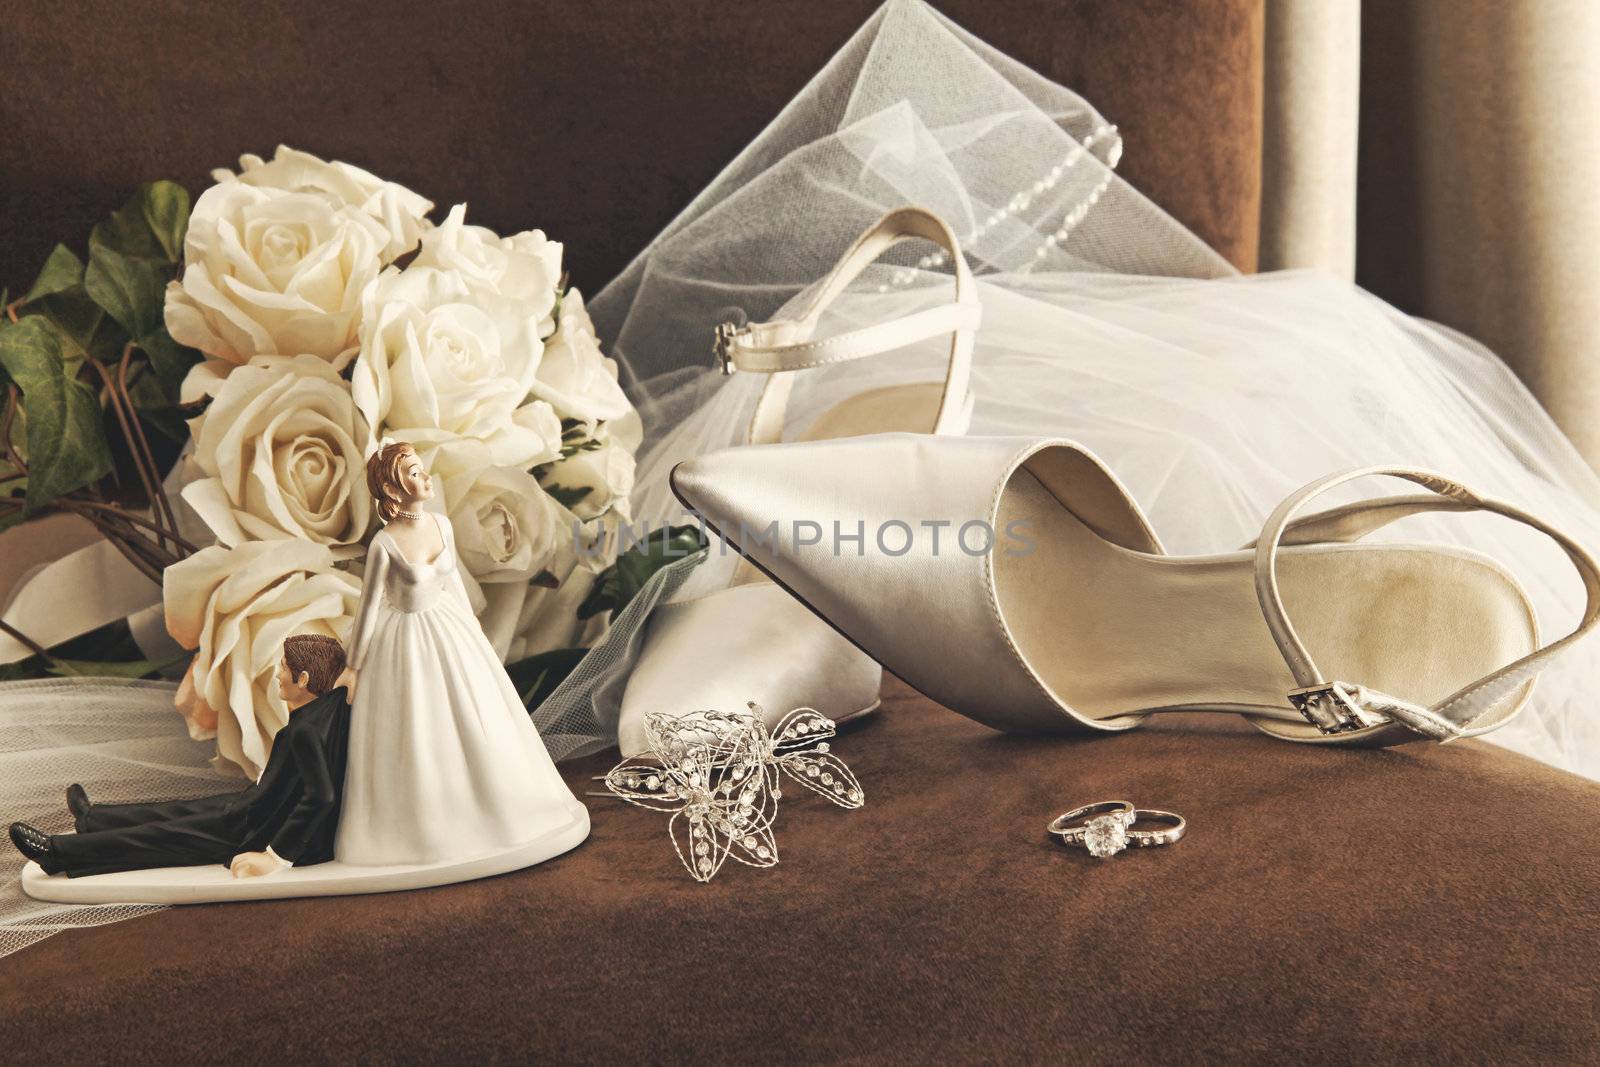 Bouquet of white roses, rings and satin wedding shoes on chair